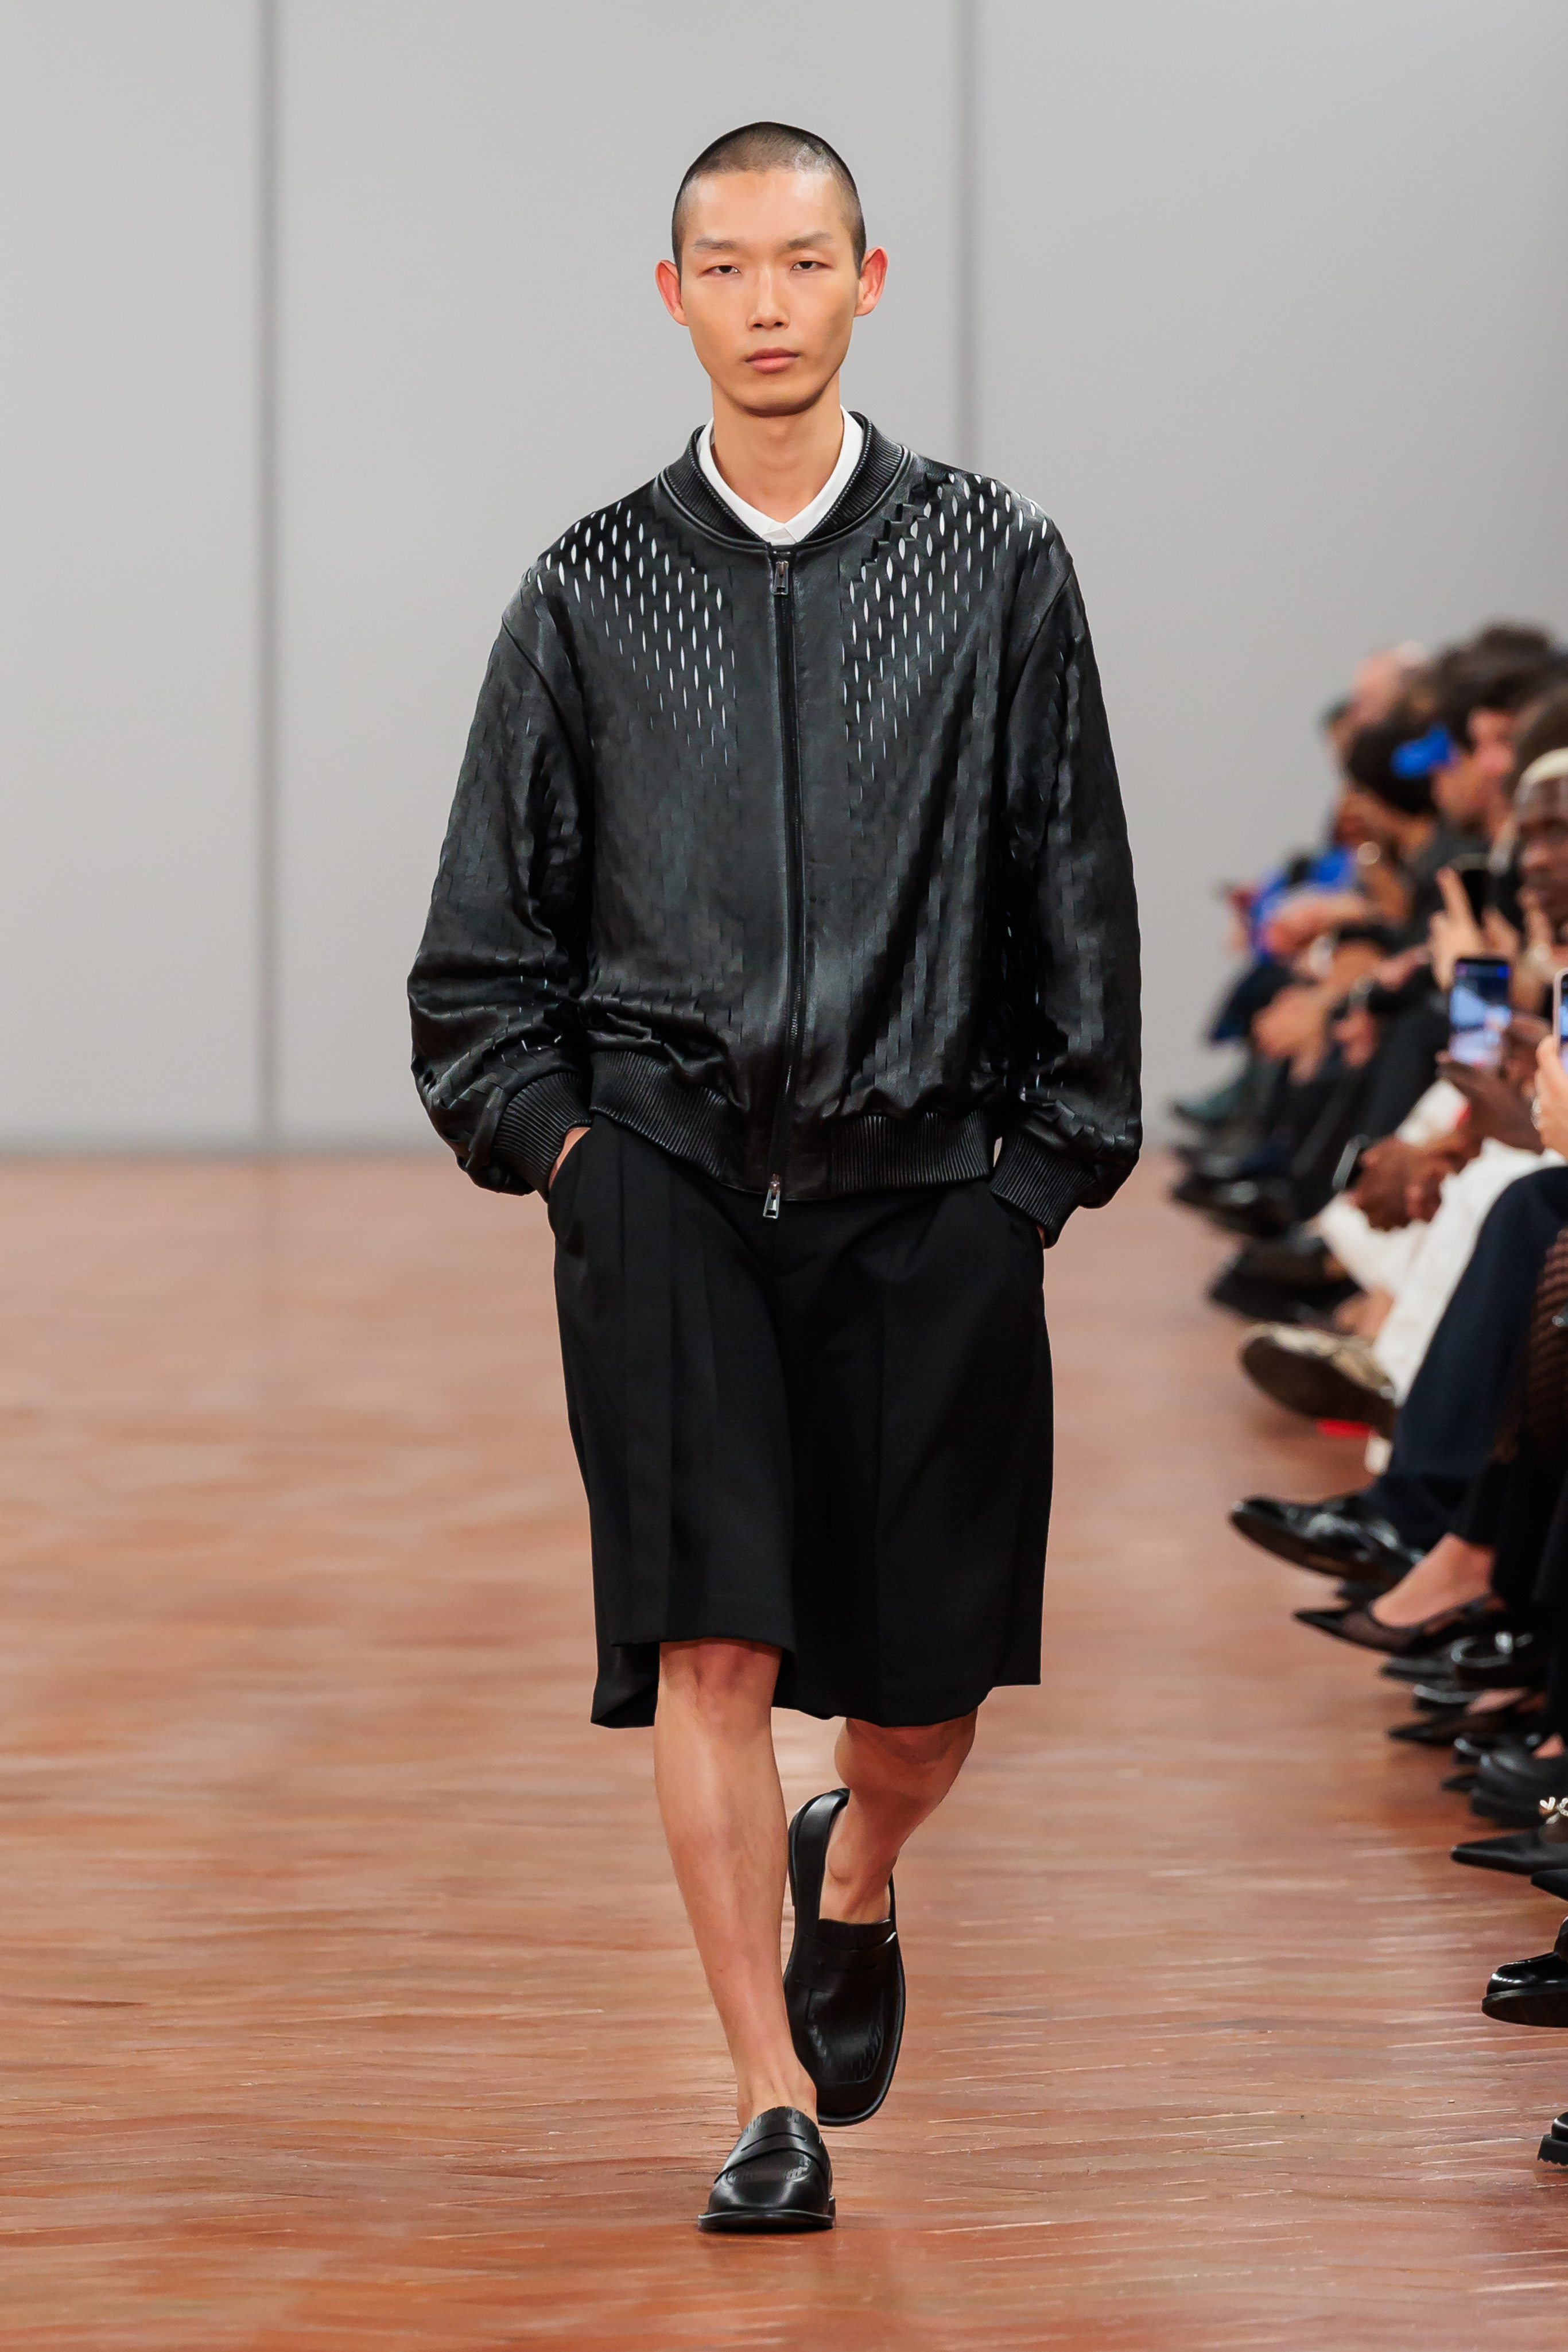 Model walks runway in a perforated leather jacket over a collared shirt and shorts ensemble